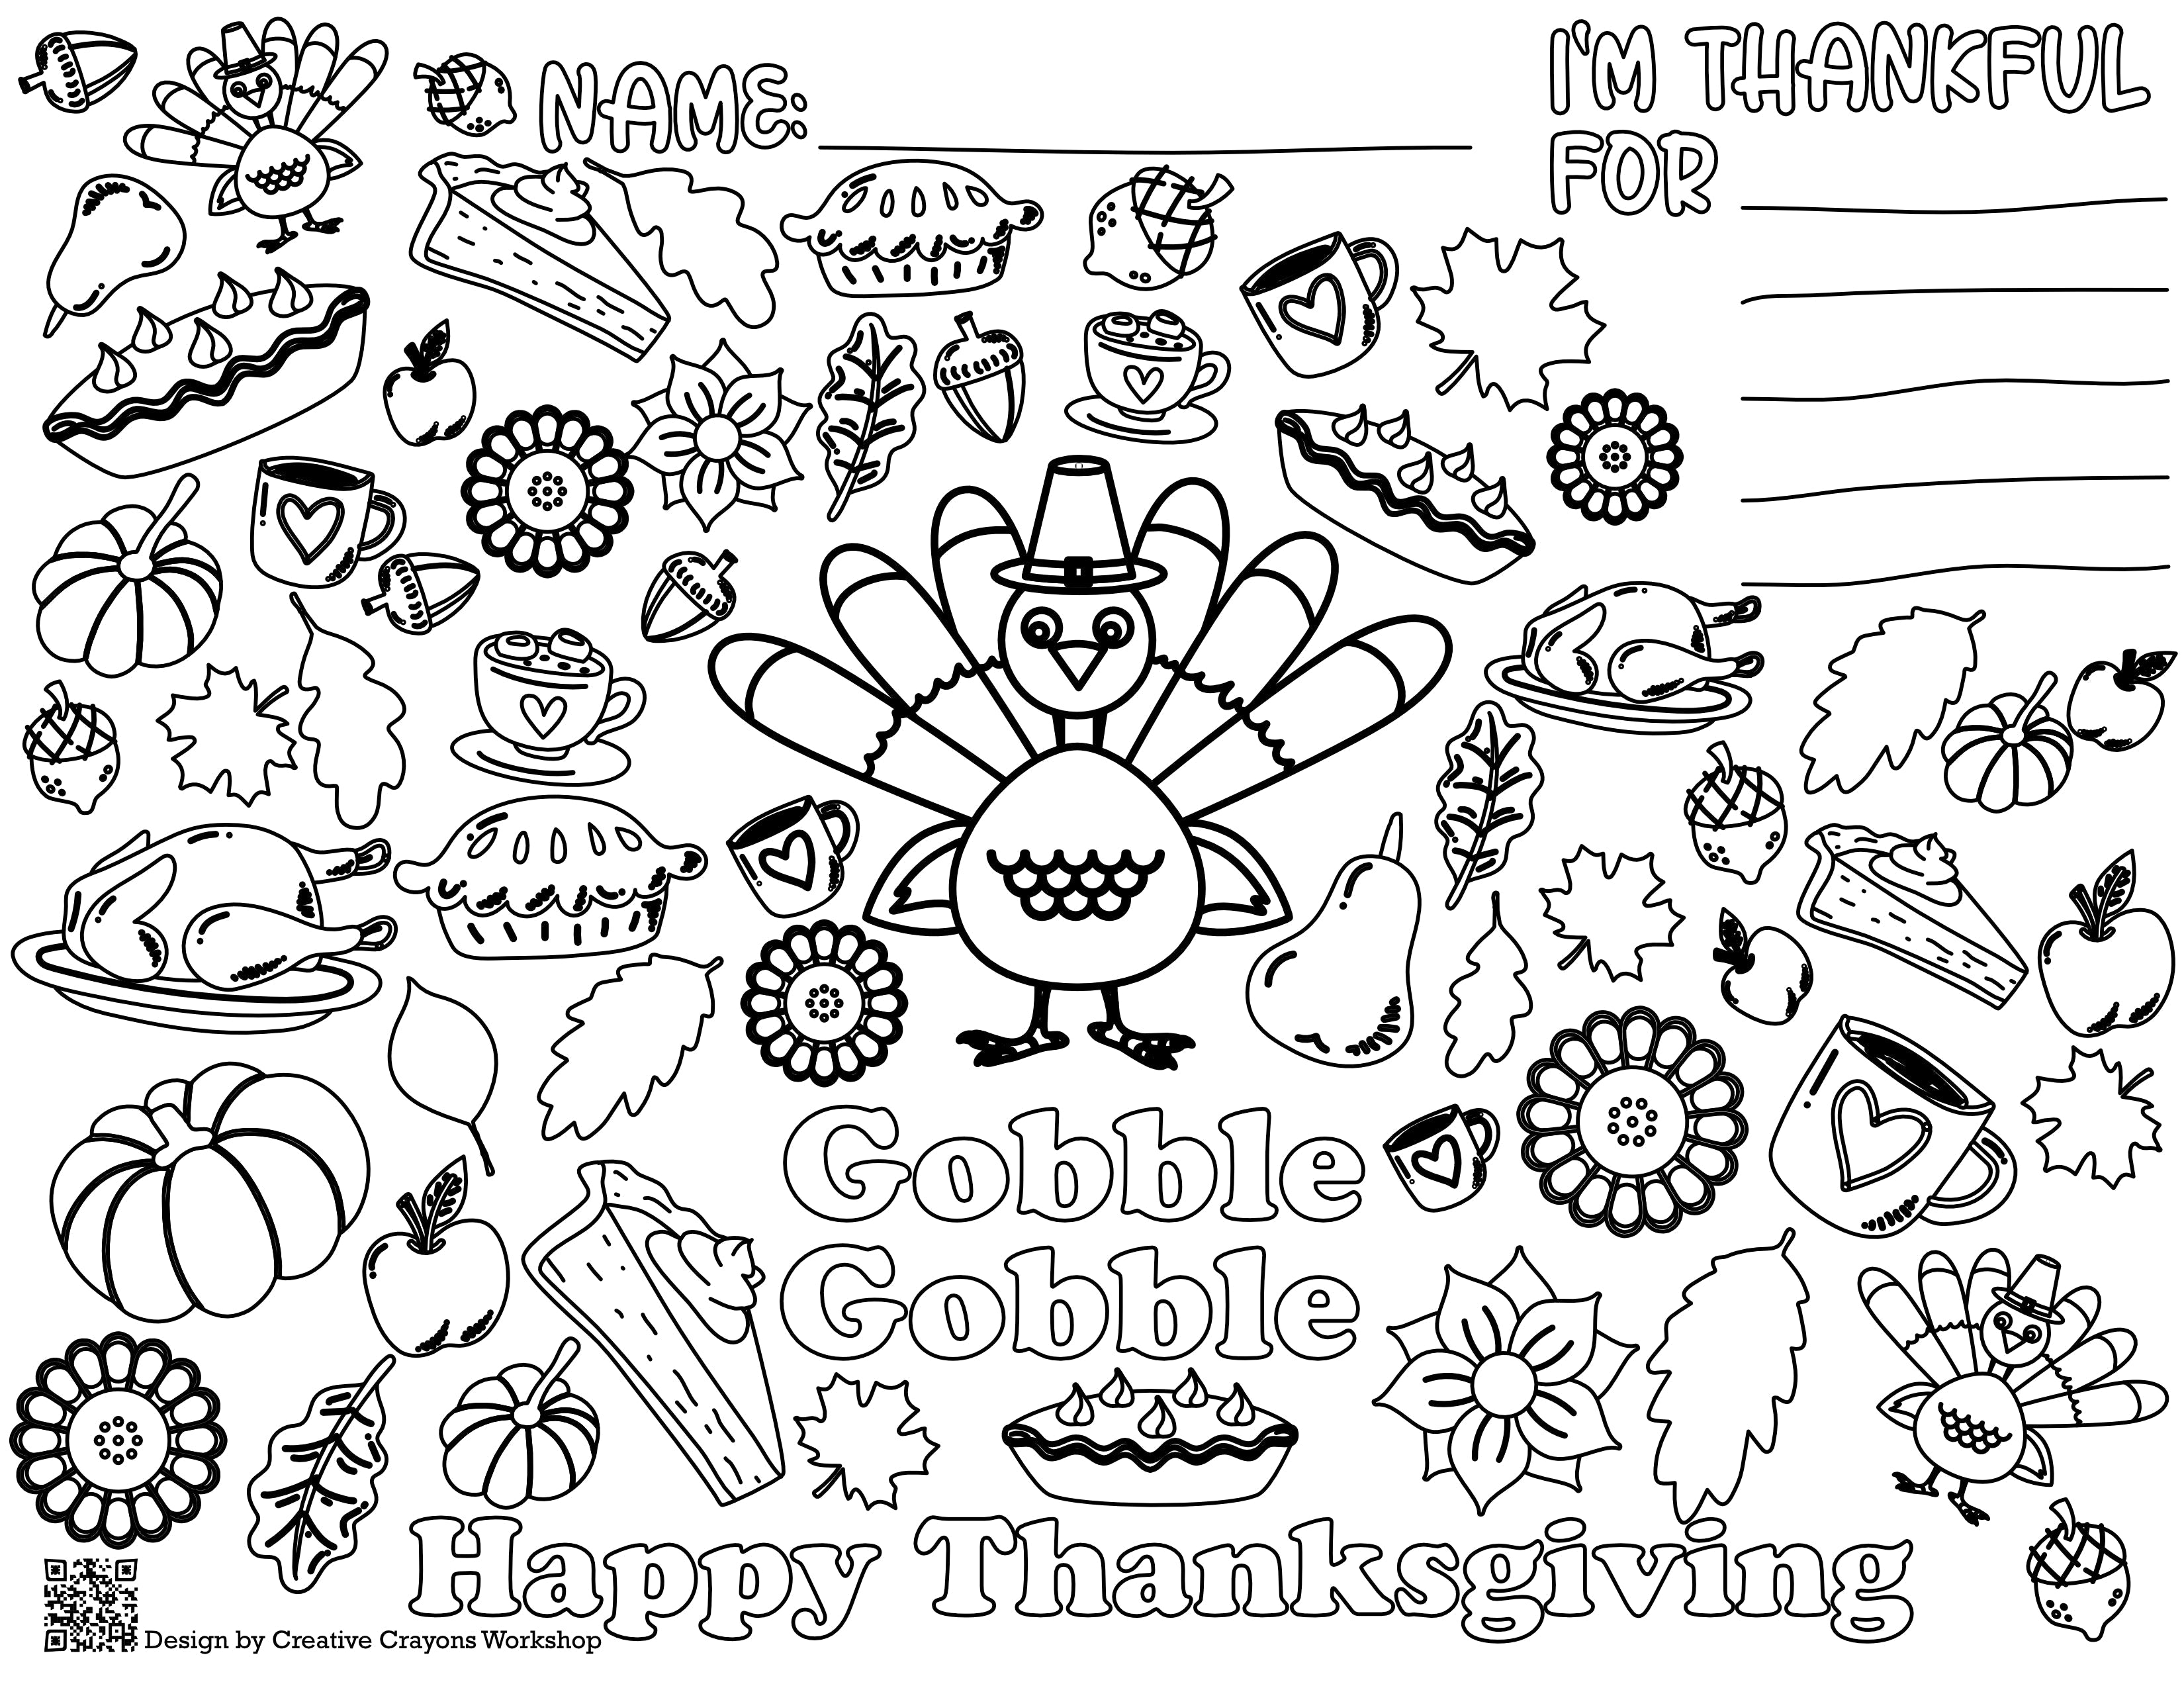 Thanksgiving coloring page â